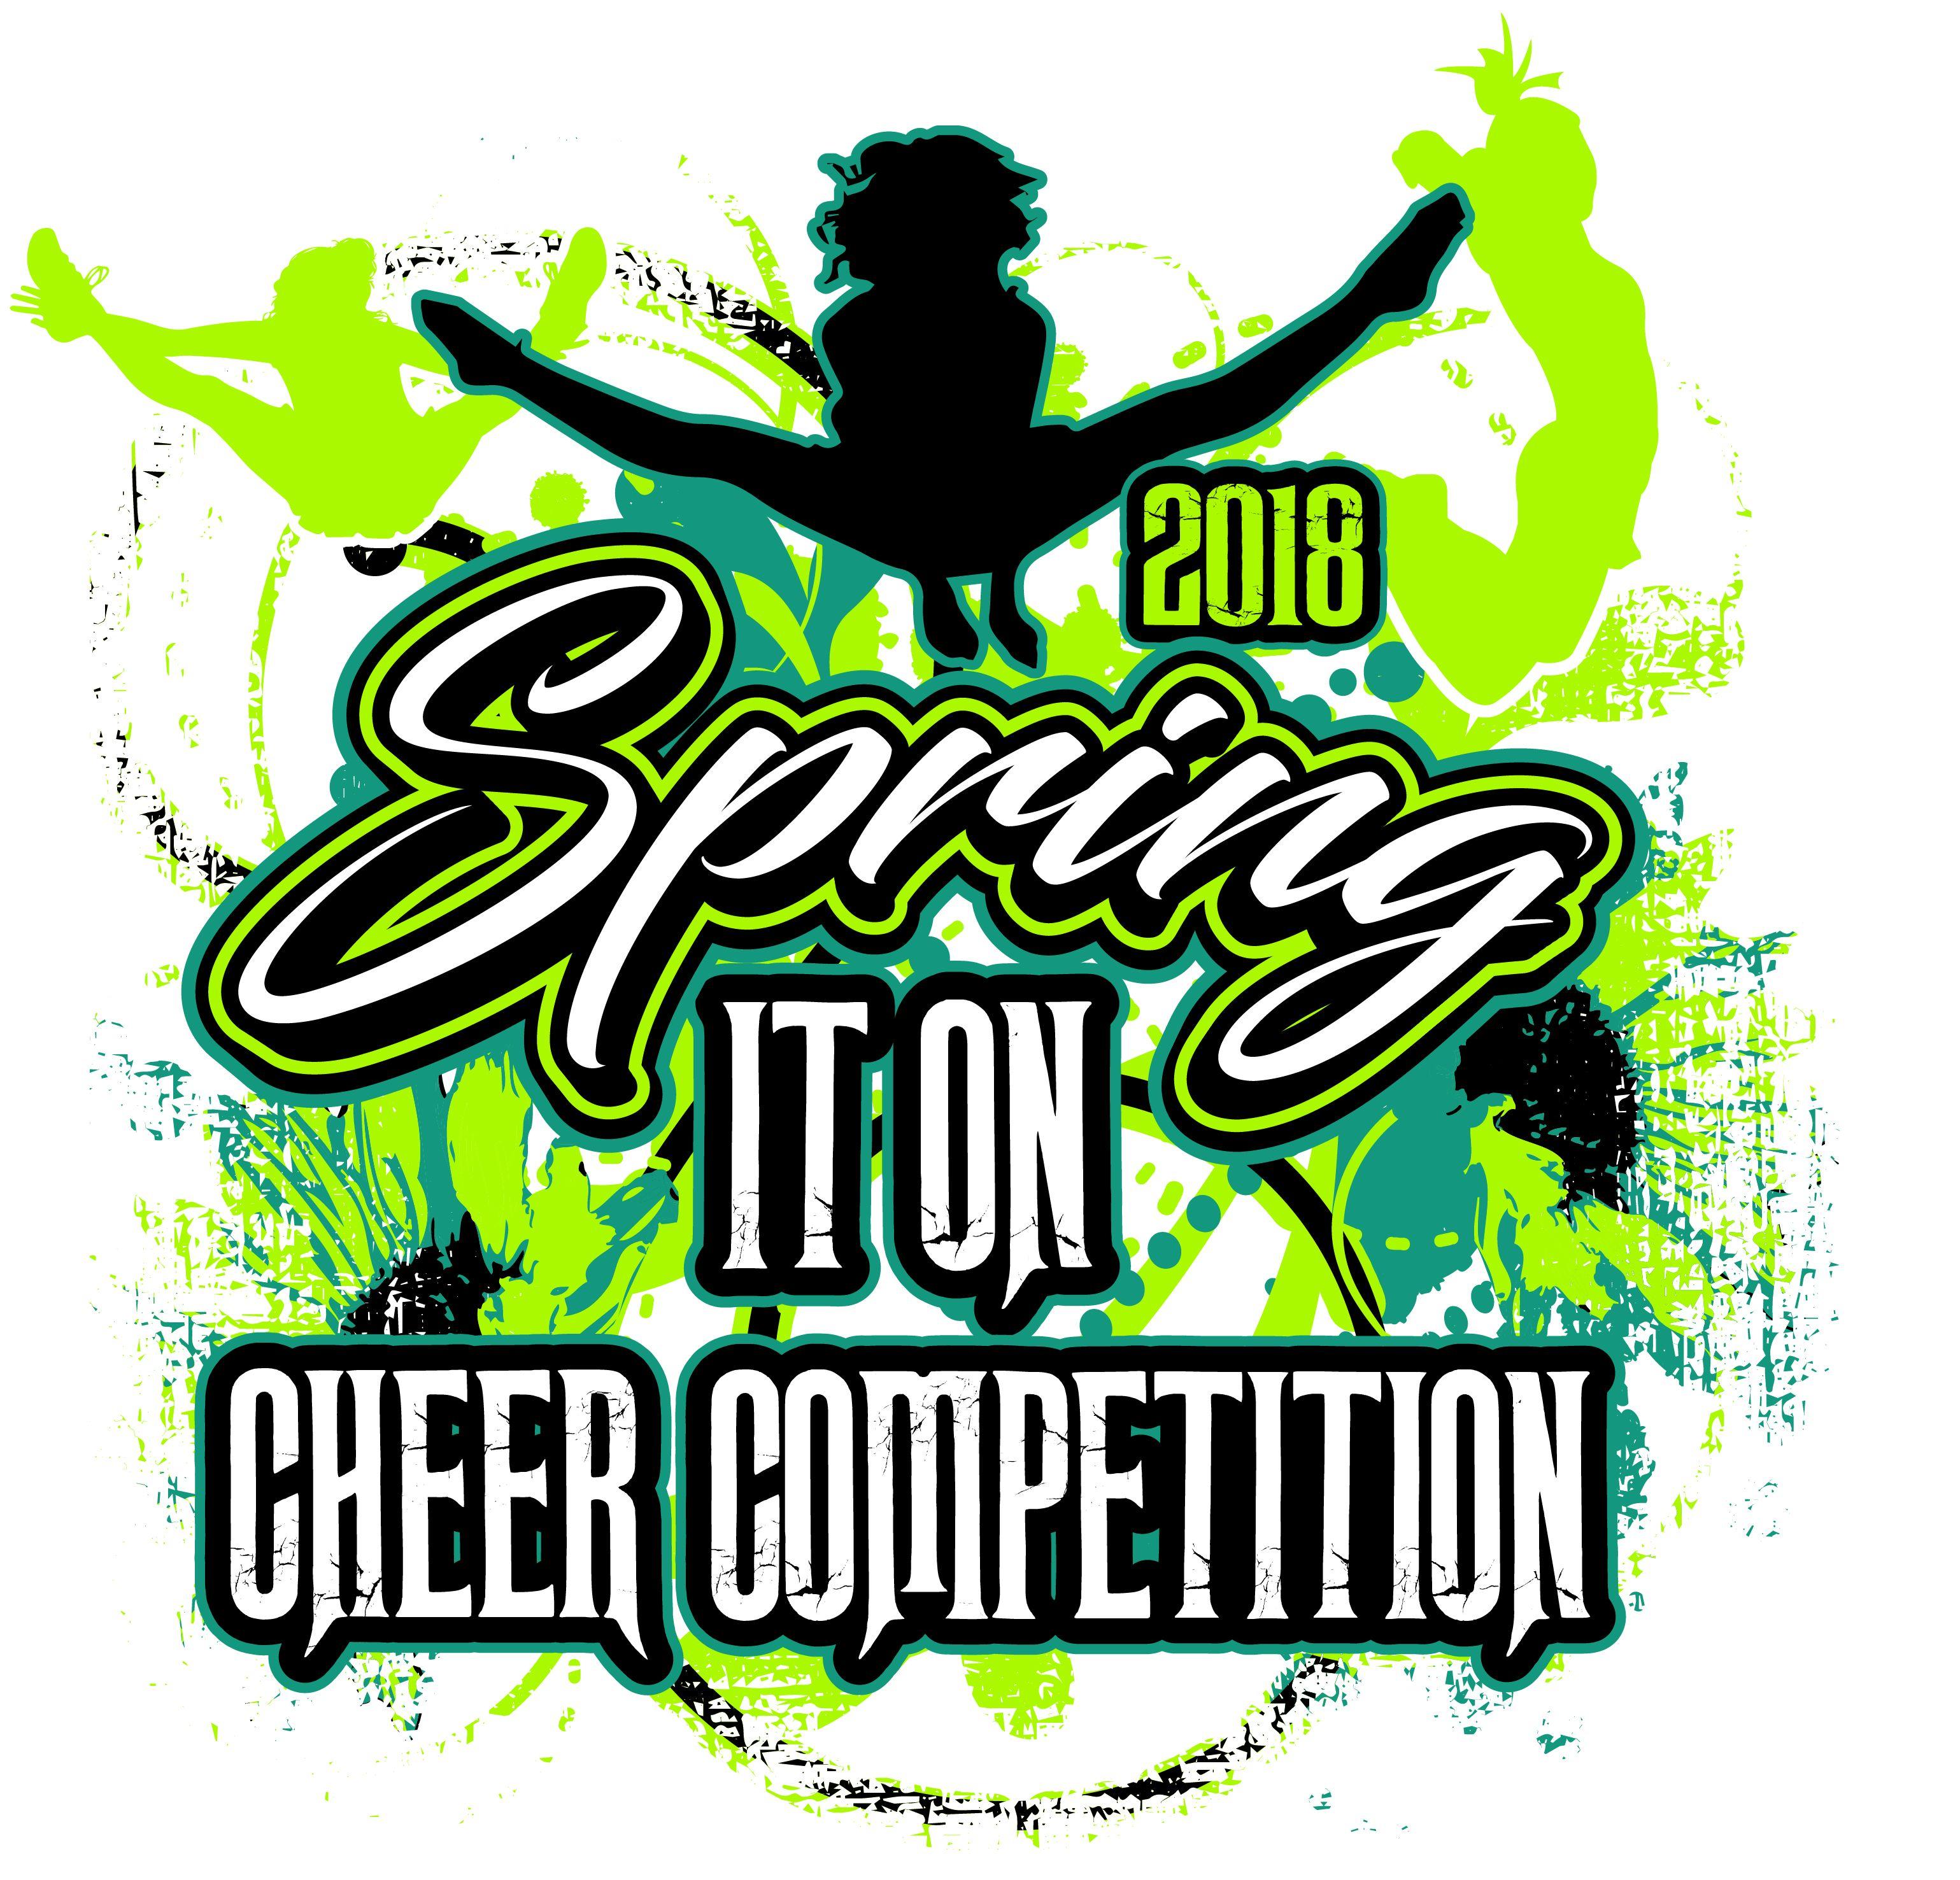 Google Competition 2018 Logo - SPRING IT ON CHEER COMPETITION 2018 T Shirt Vector Logo Design